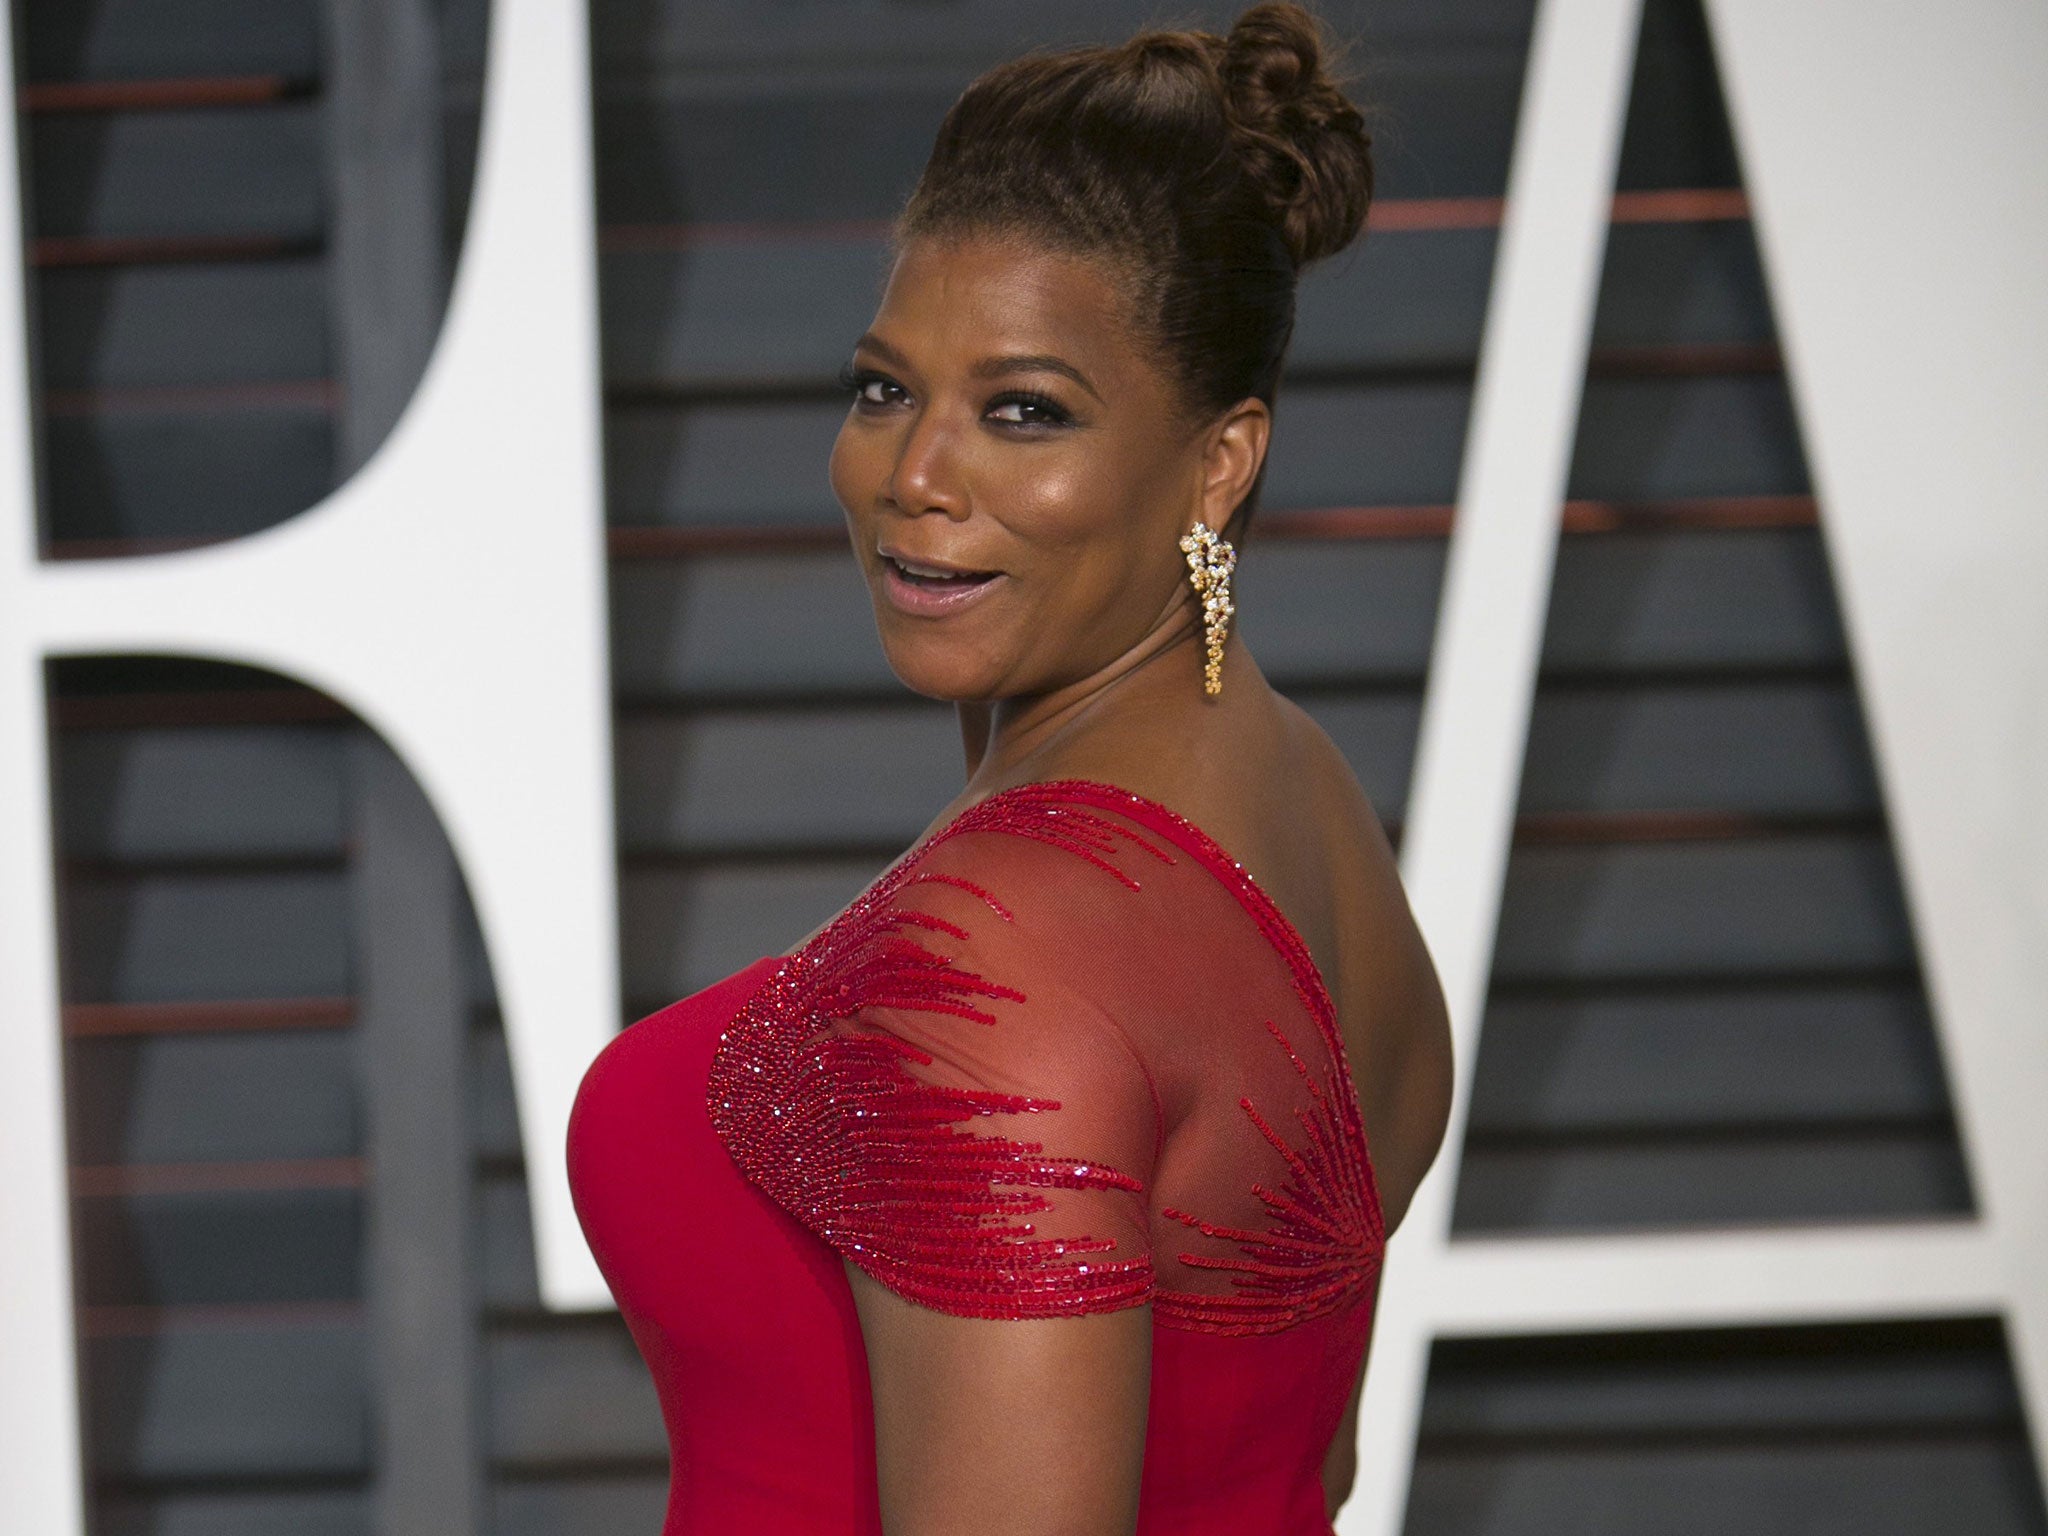 Queen Latifah has discussed her character's sexuality in the forthcoming biopic, Bessie